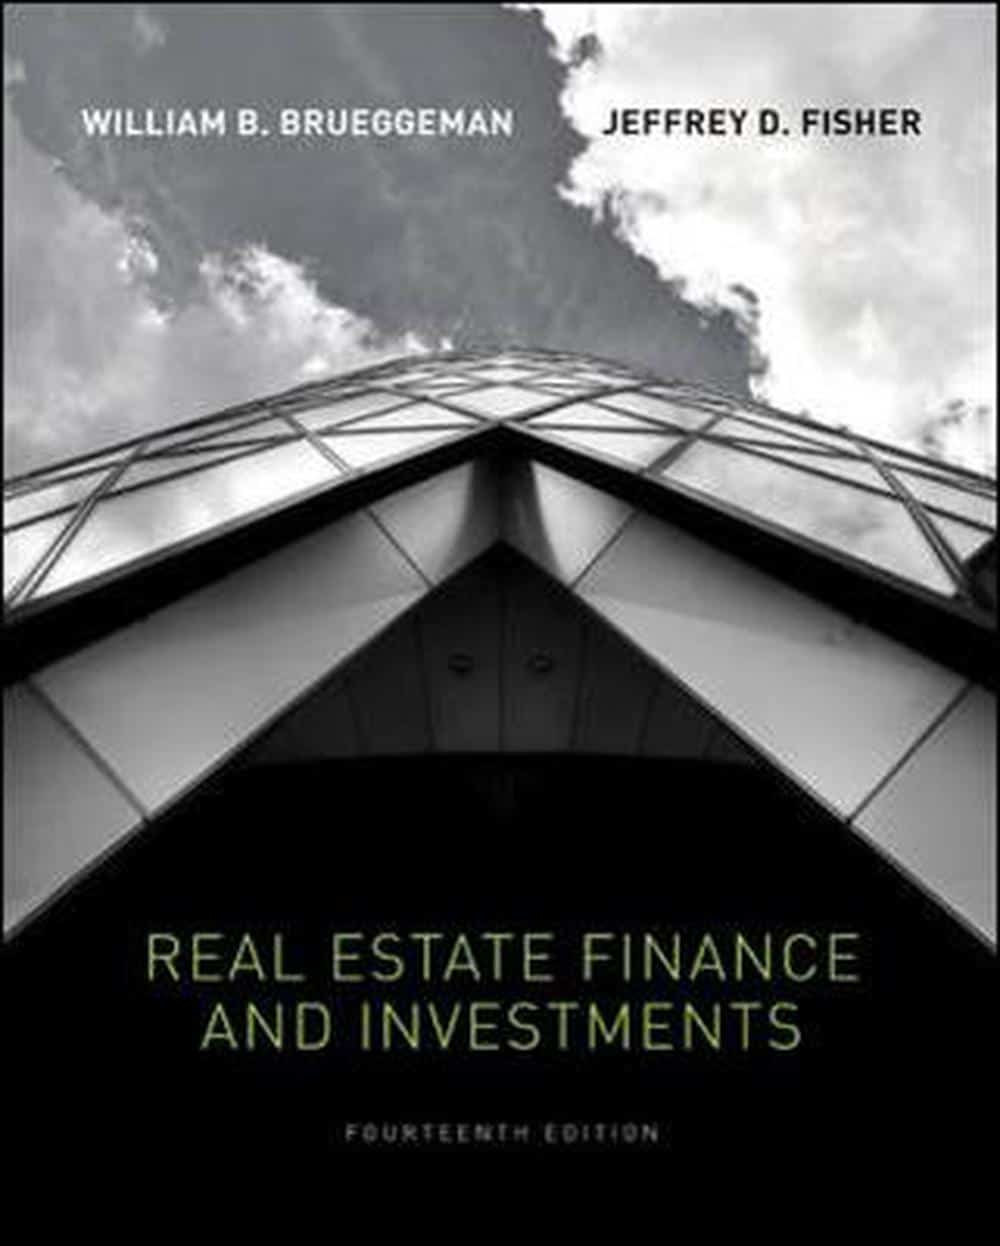 Real Estate Finance and Investments by William B. Brueggeman (English ...